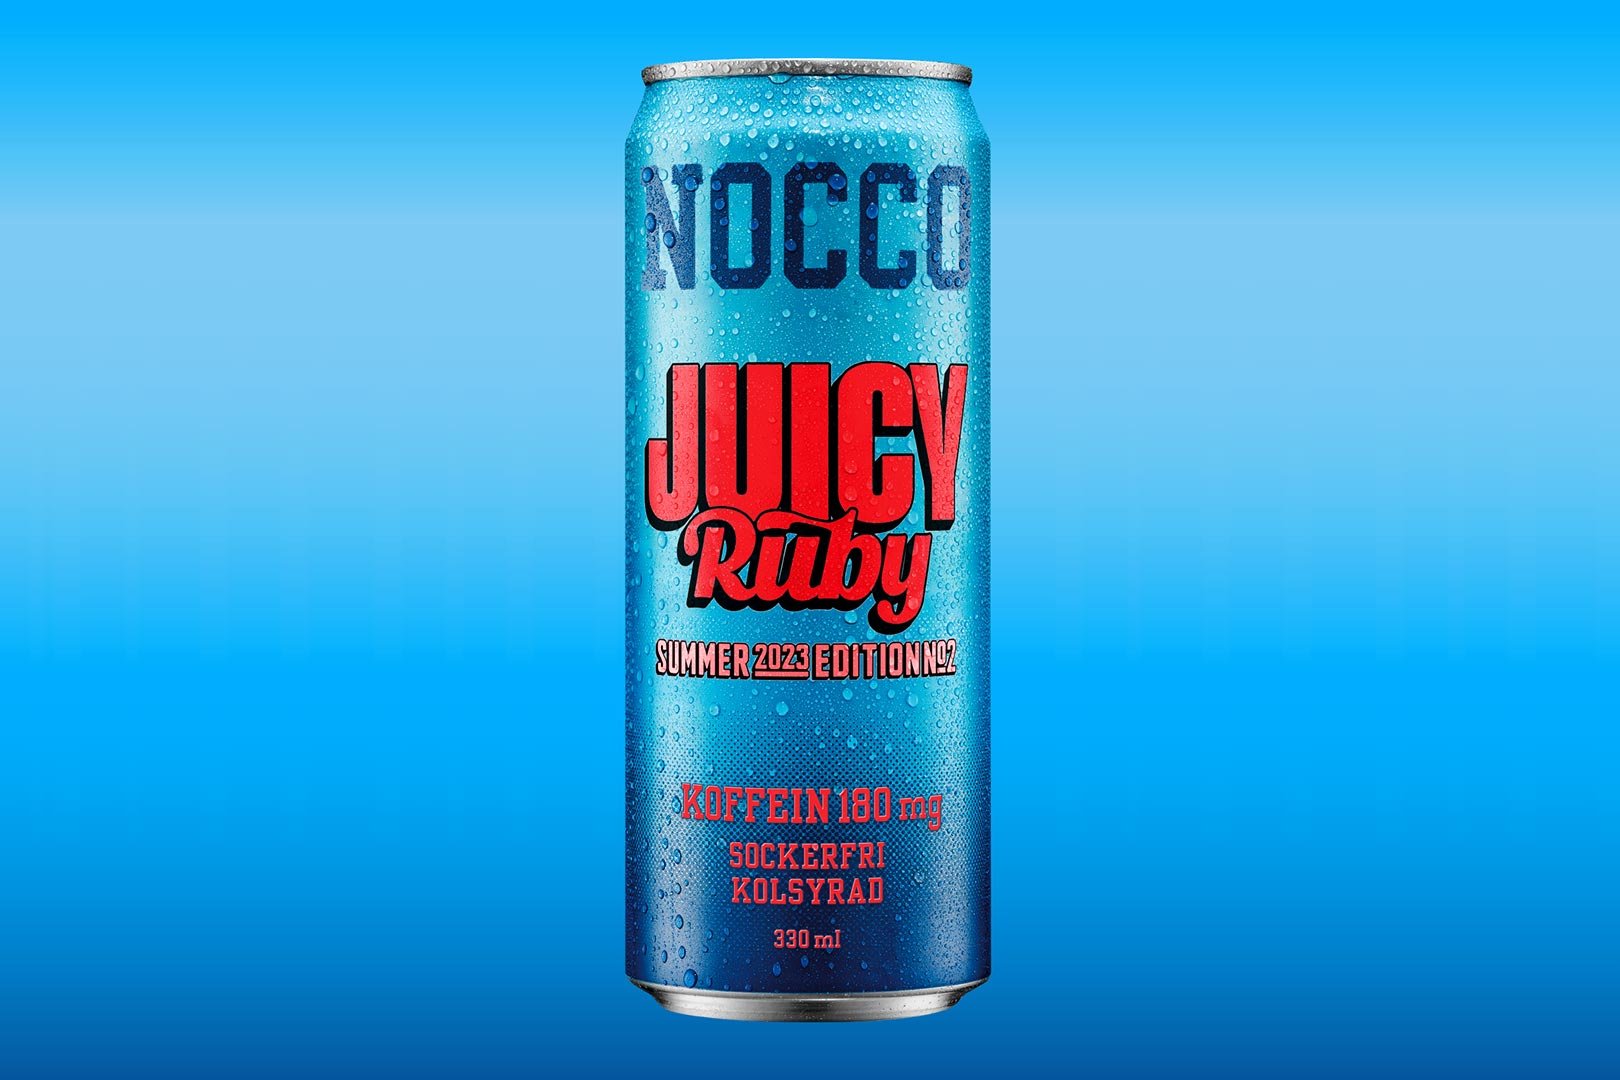 NOCCO's Summer Edition and raspberry-flavored Juicy Ruby